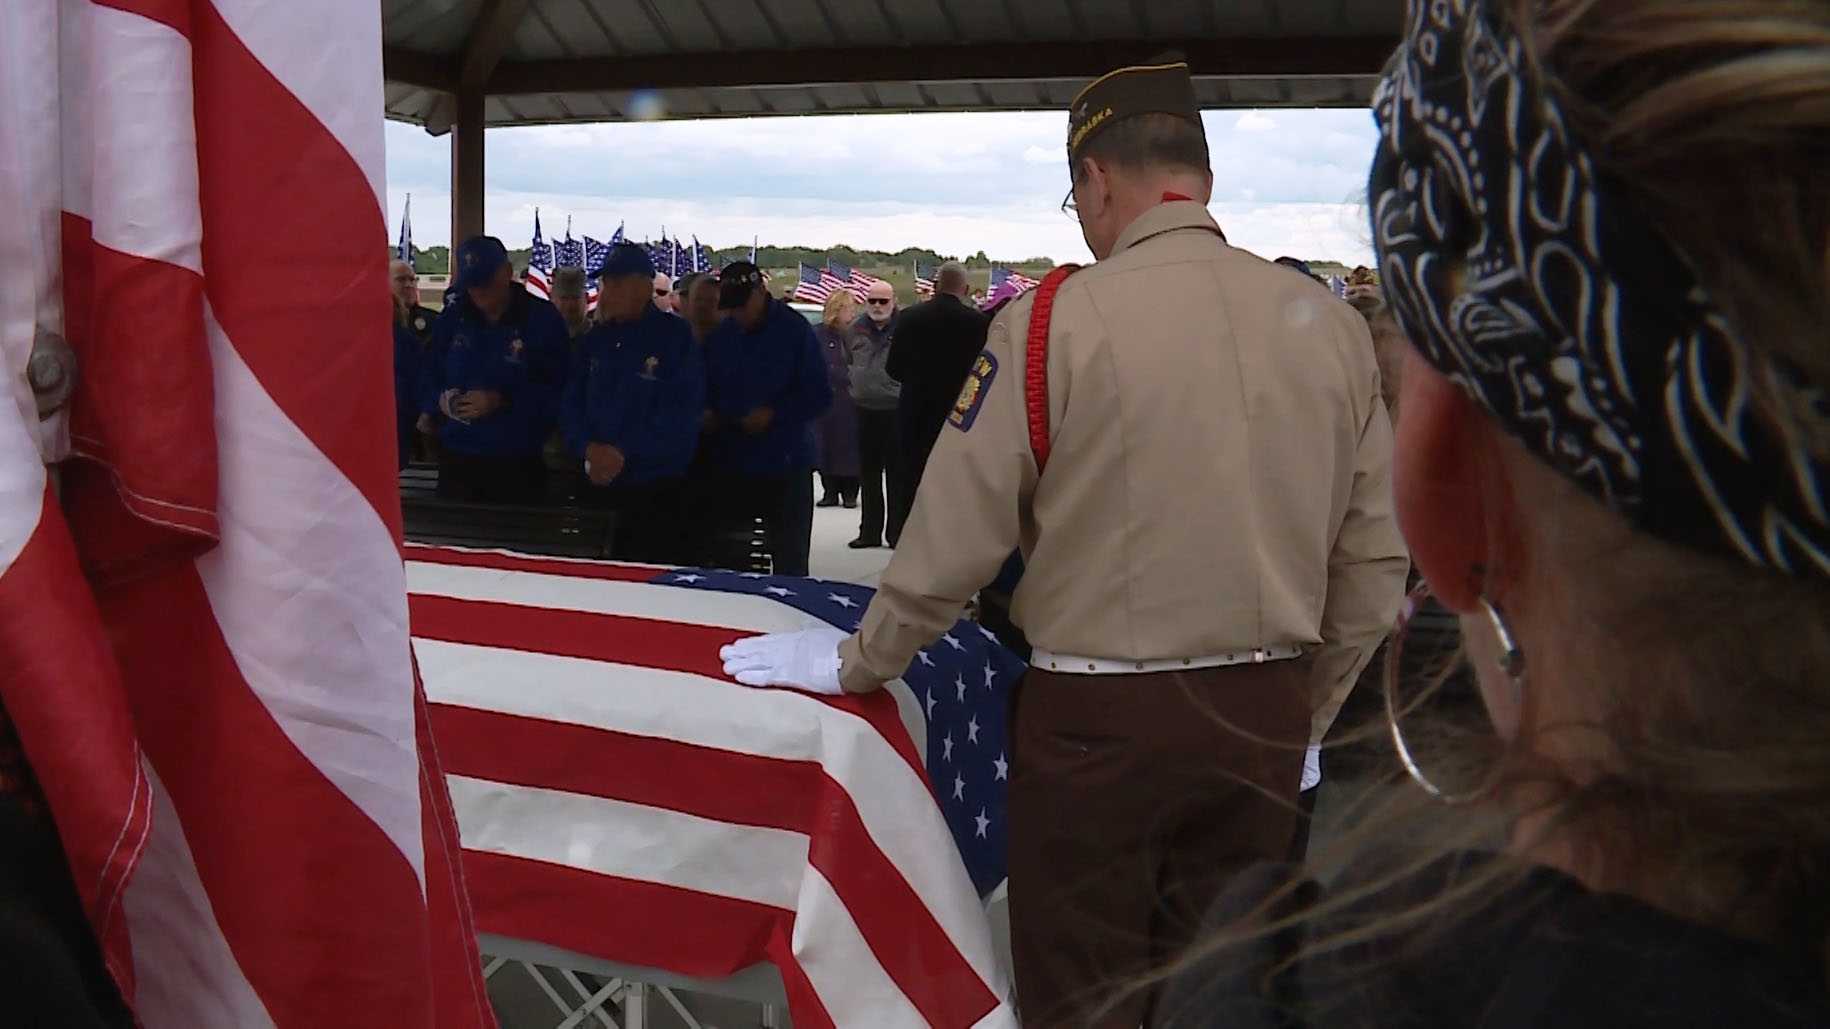 Dozens gather for funeral of vet they never met